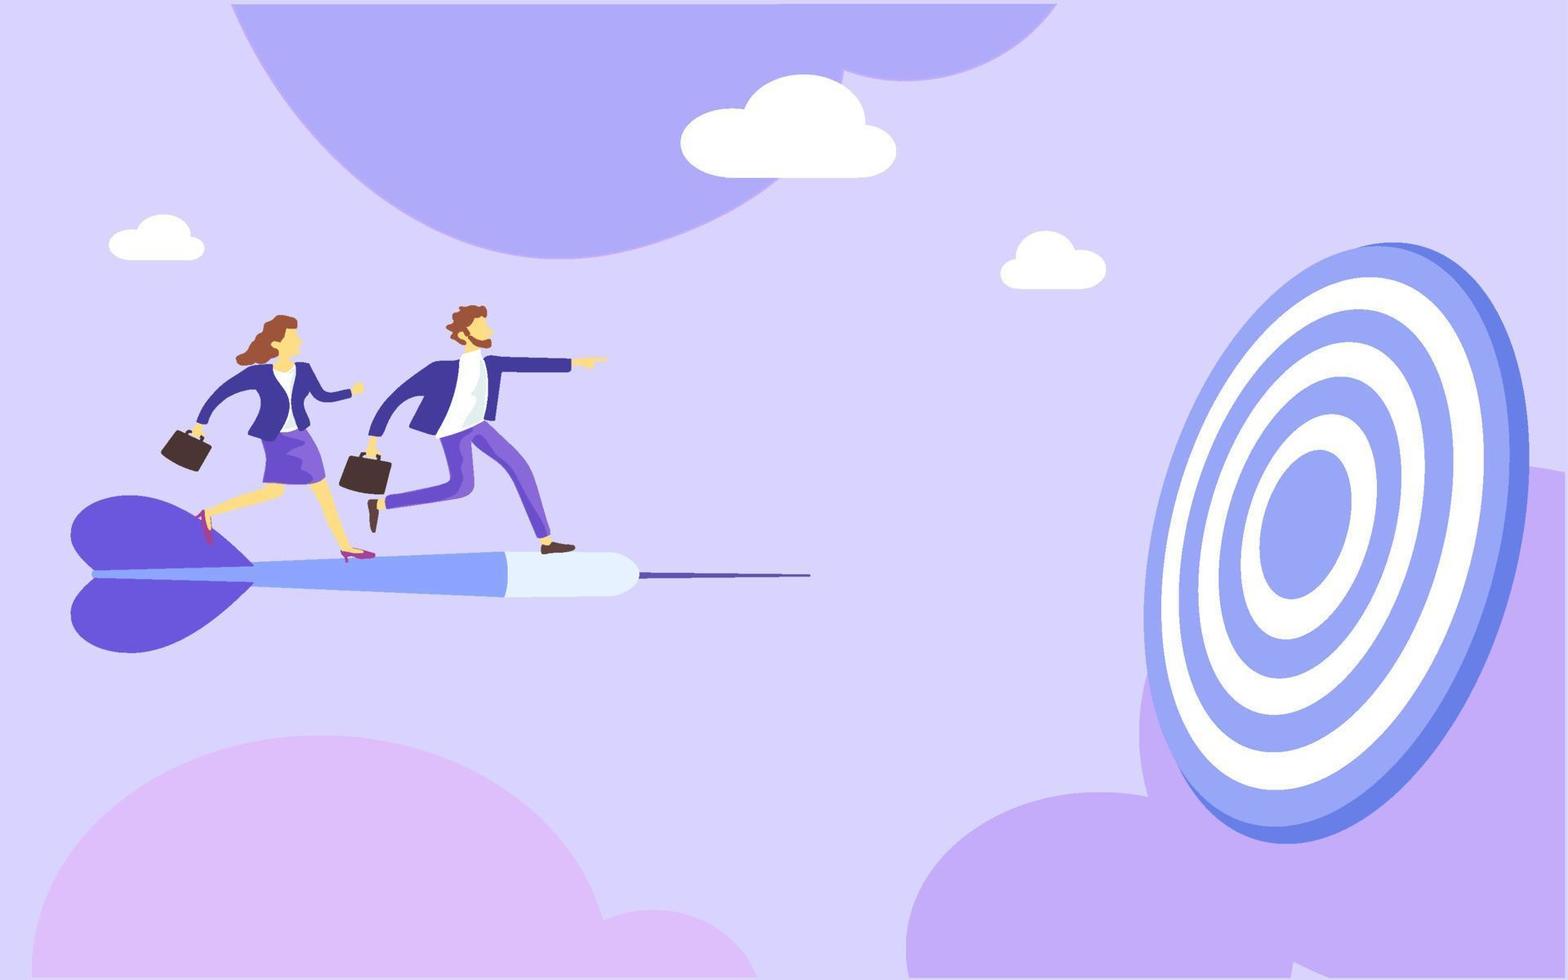 Business Marketing illustrations. Scene with man and woman run towards the goal of success business. Trendy vector style